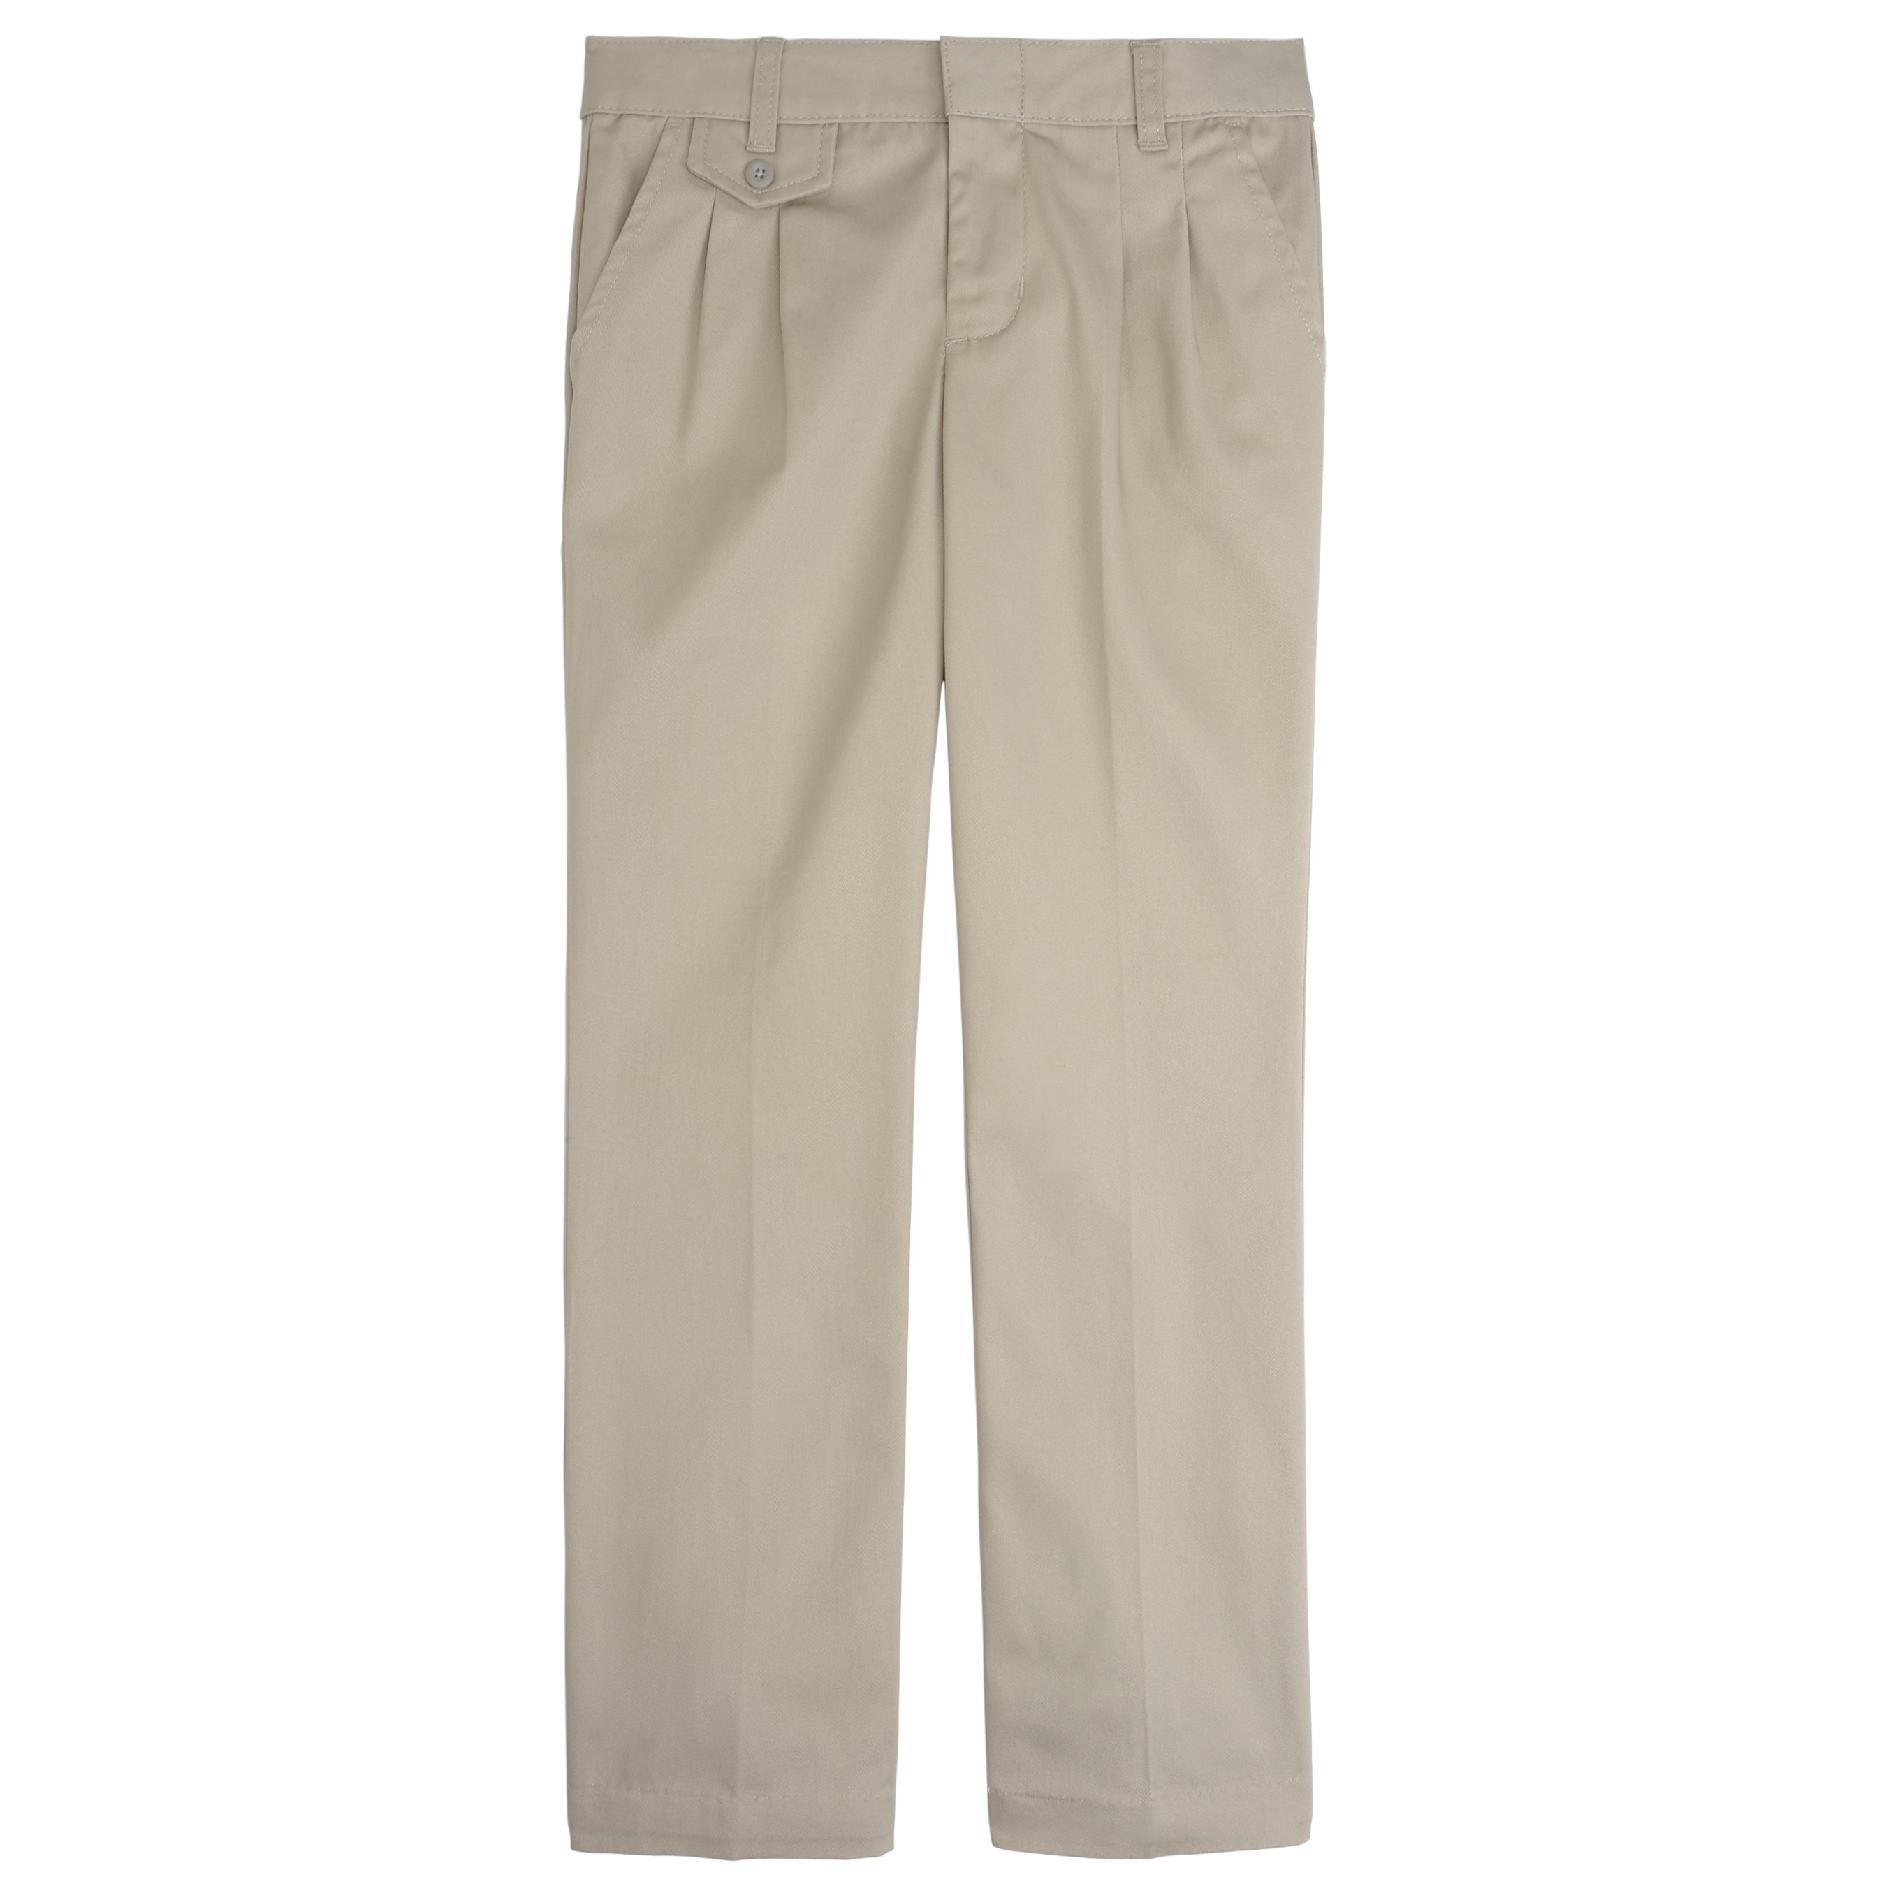 At School by French Toast Adjustable Waist Pleated Pant